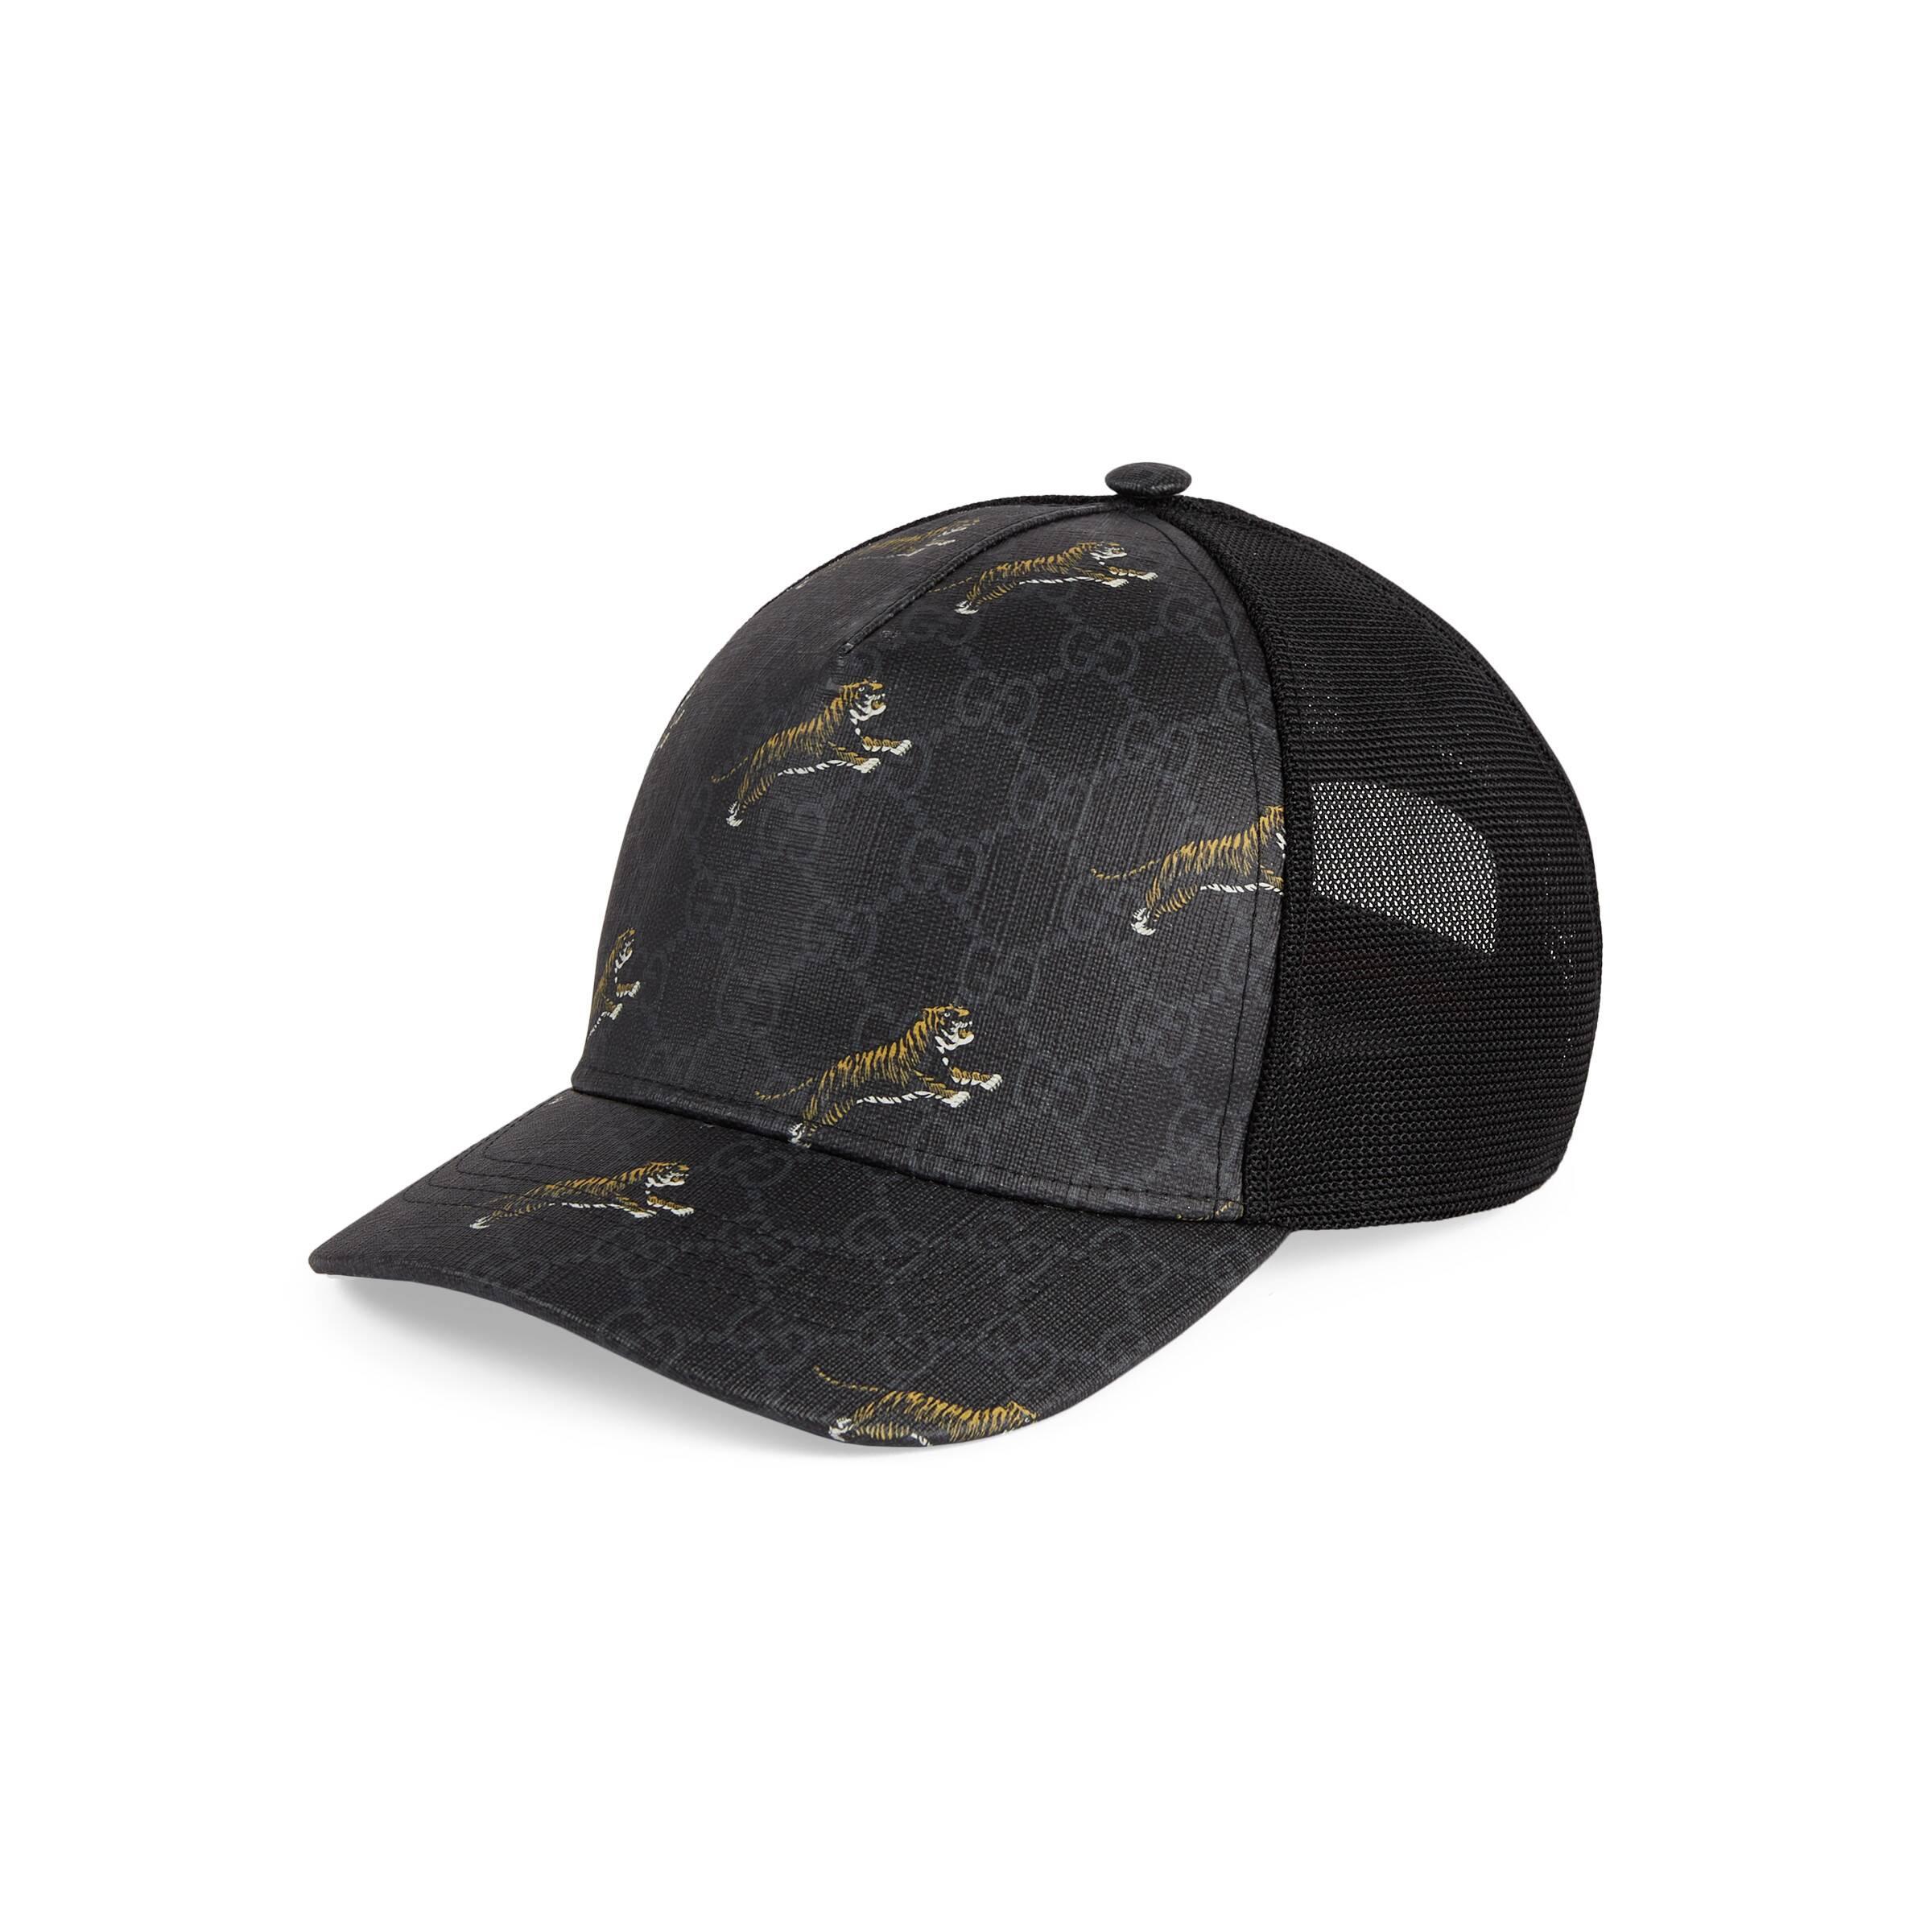 Gucci Canvas Tiger Printed Baseball Cap in Black for Men - Lyst